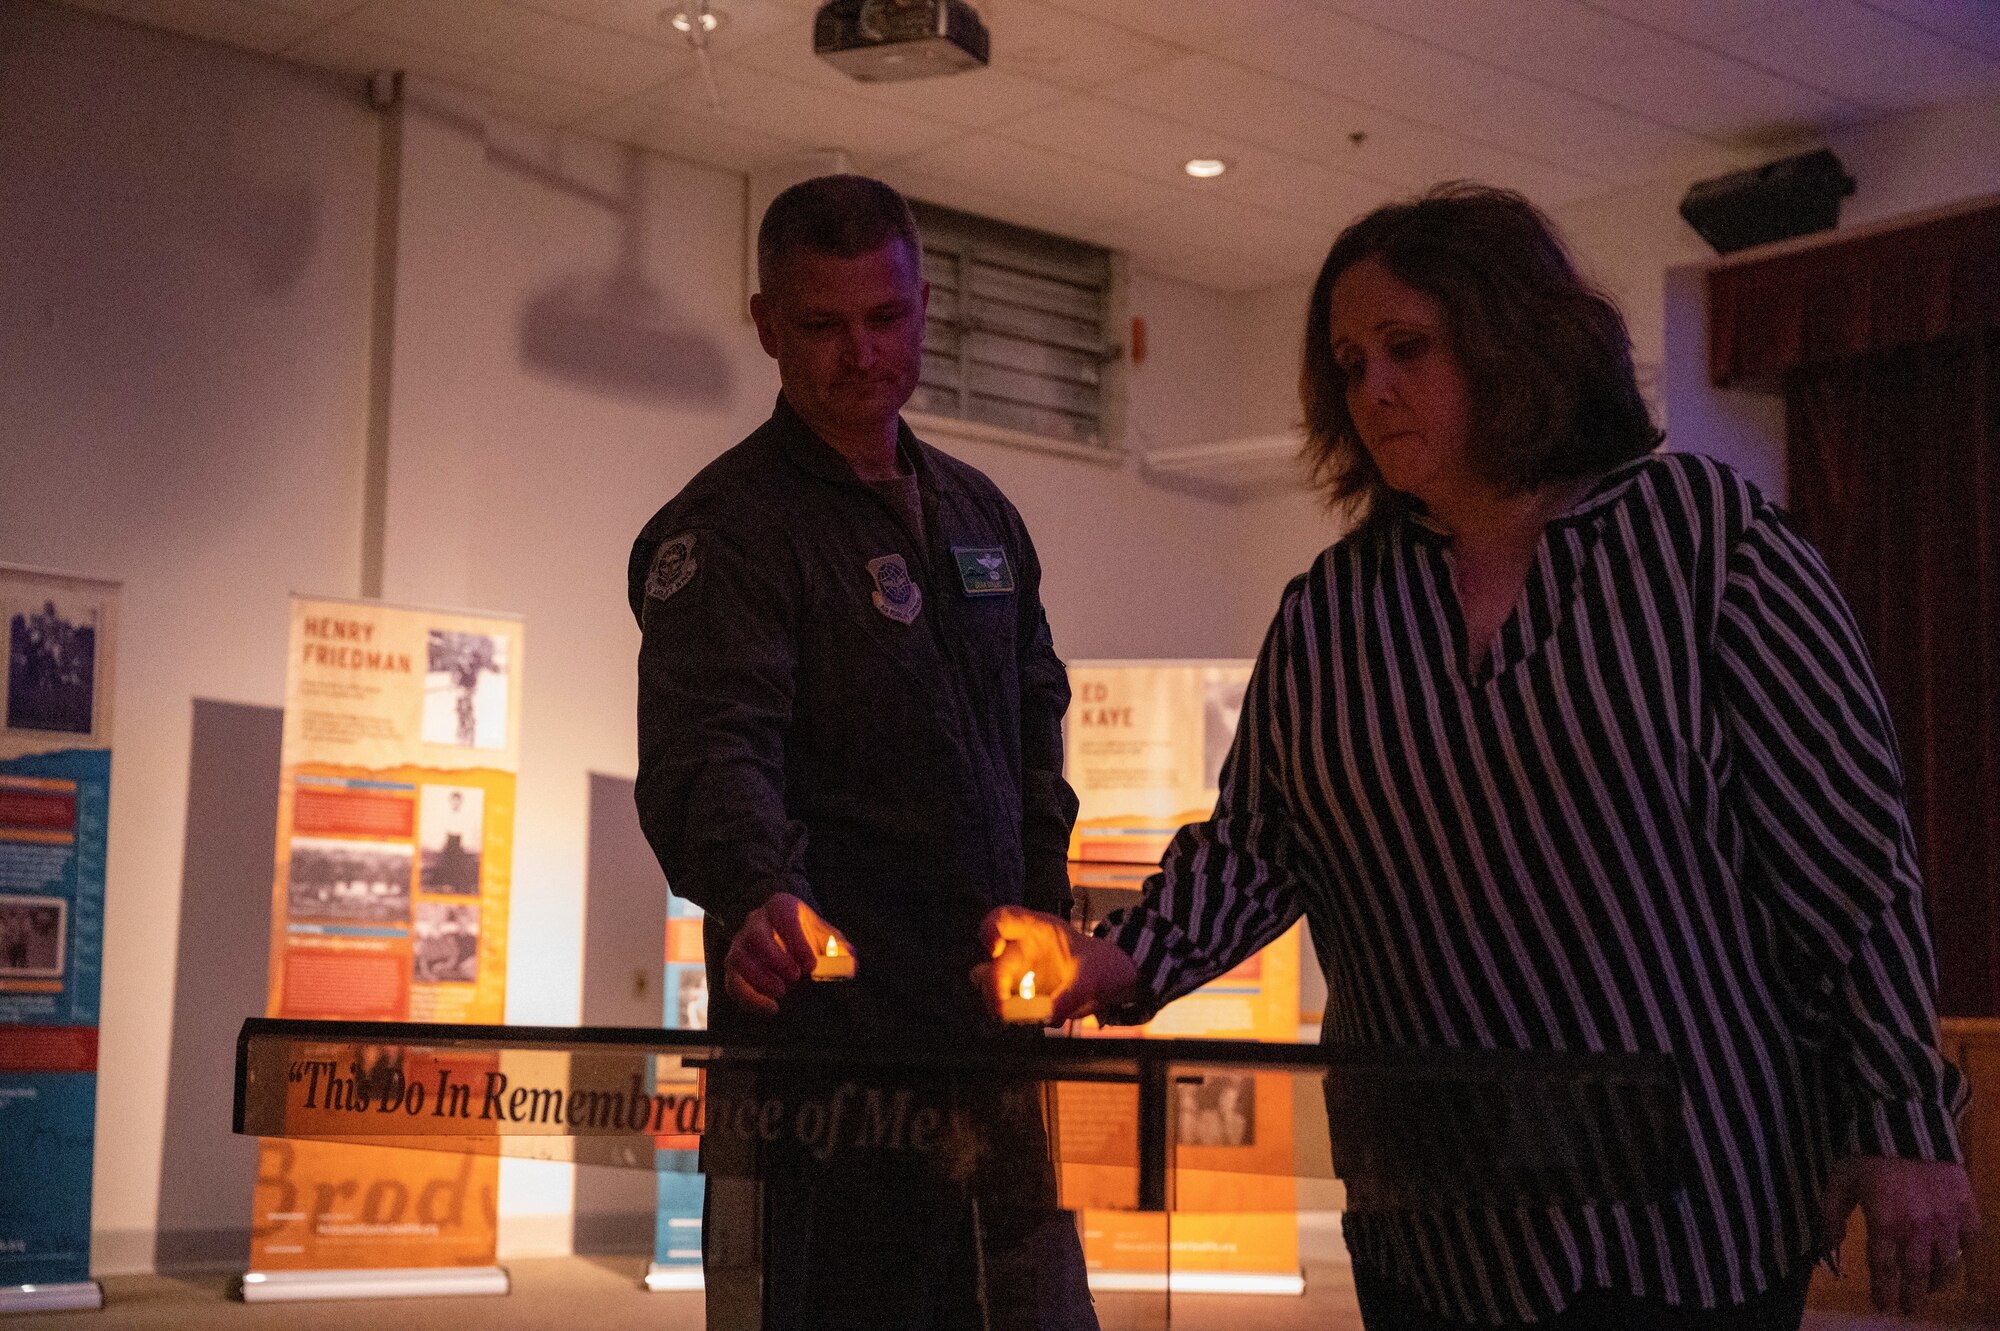 U.S. Air Force Col. Brian Collins, left, vice commander, and Sarah Amato, chief of public affairs, both with the 62nd Airlift Wing, participate in the candle-lighting portion of the Holocaust Remembrance Day ceremony at Joint Base Lewis-McChord, Washington, April 28, 2022. The ceremony gave Airmen the opportunity to learn about the Holocaust and experiences of survivors. (U.S. Air Force photo by Airman 1st Class Charles Casner)